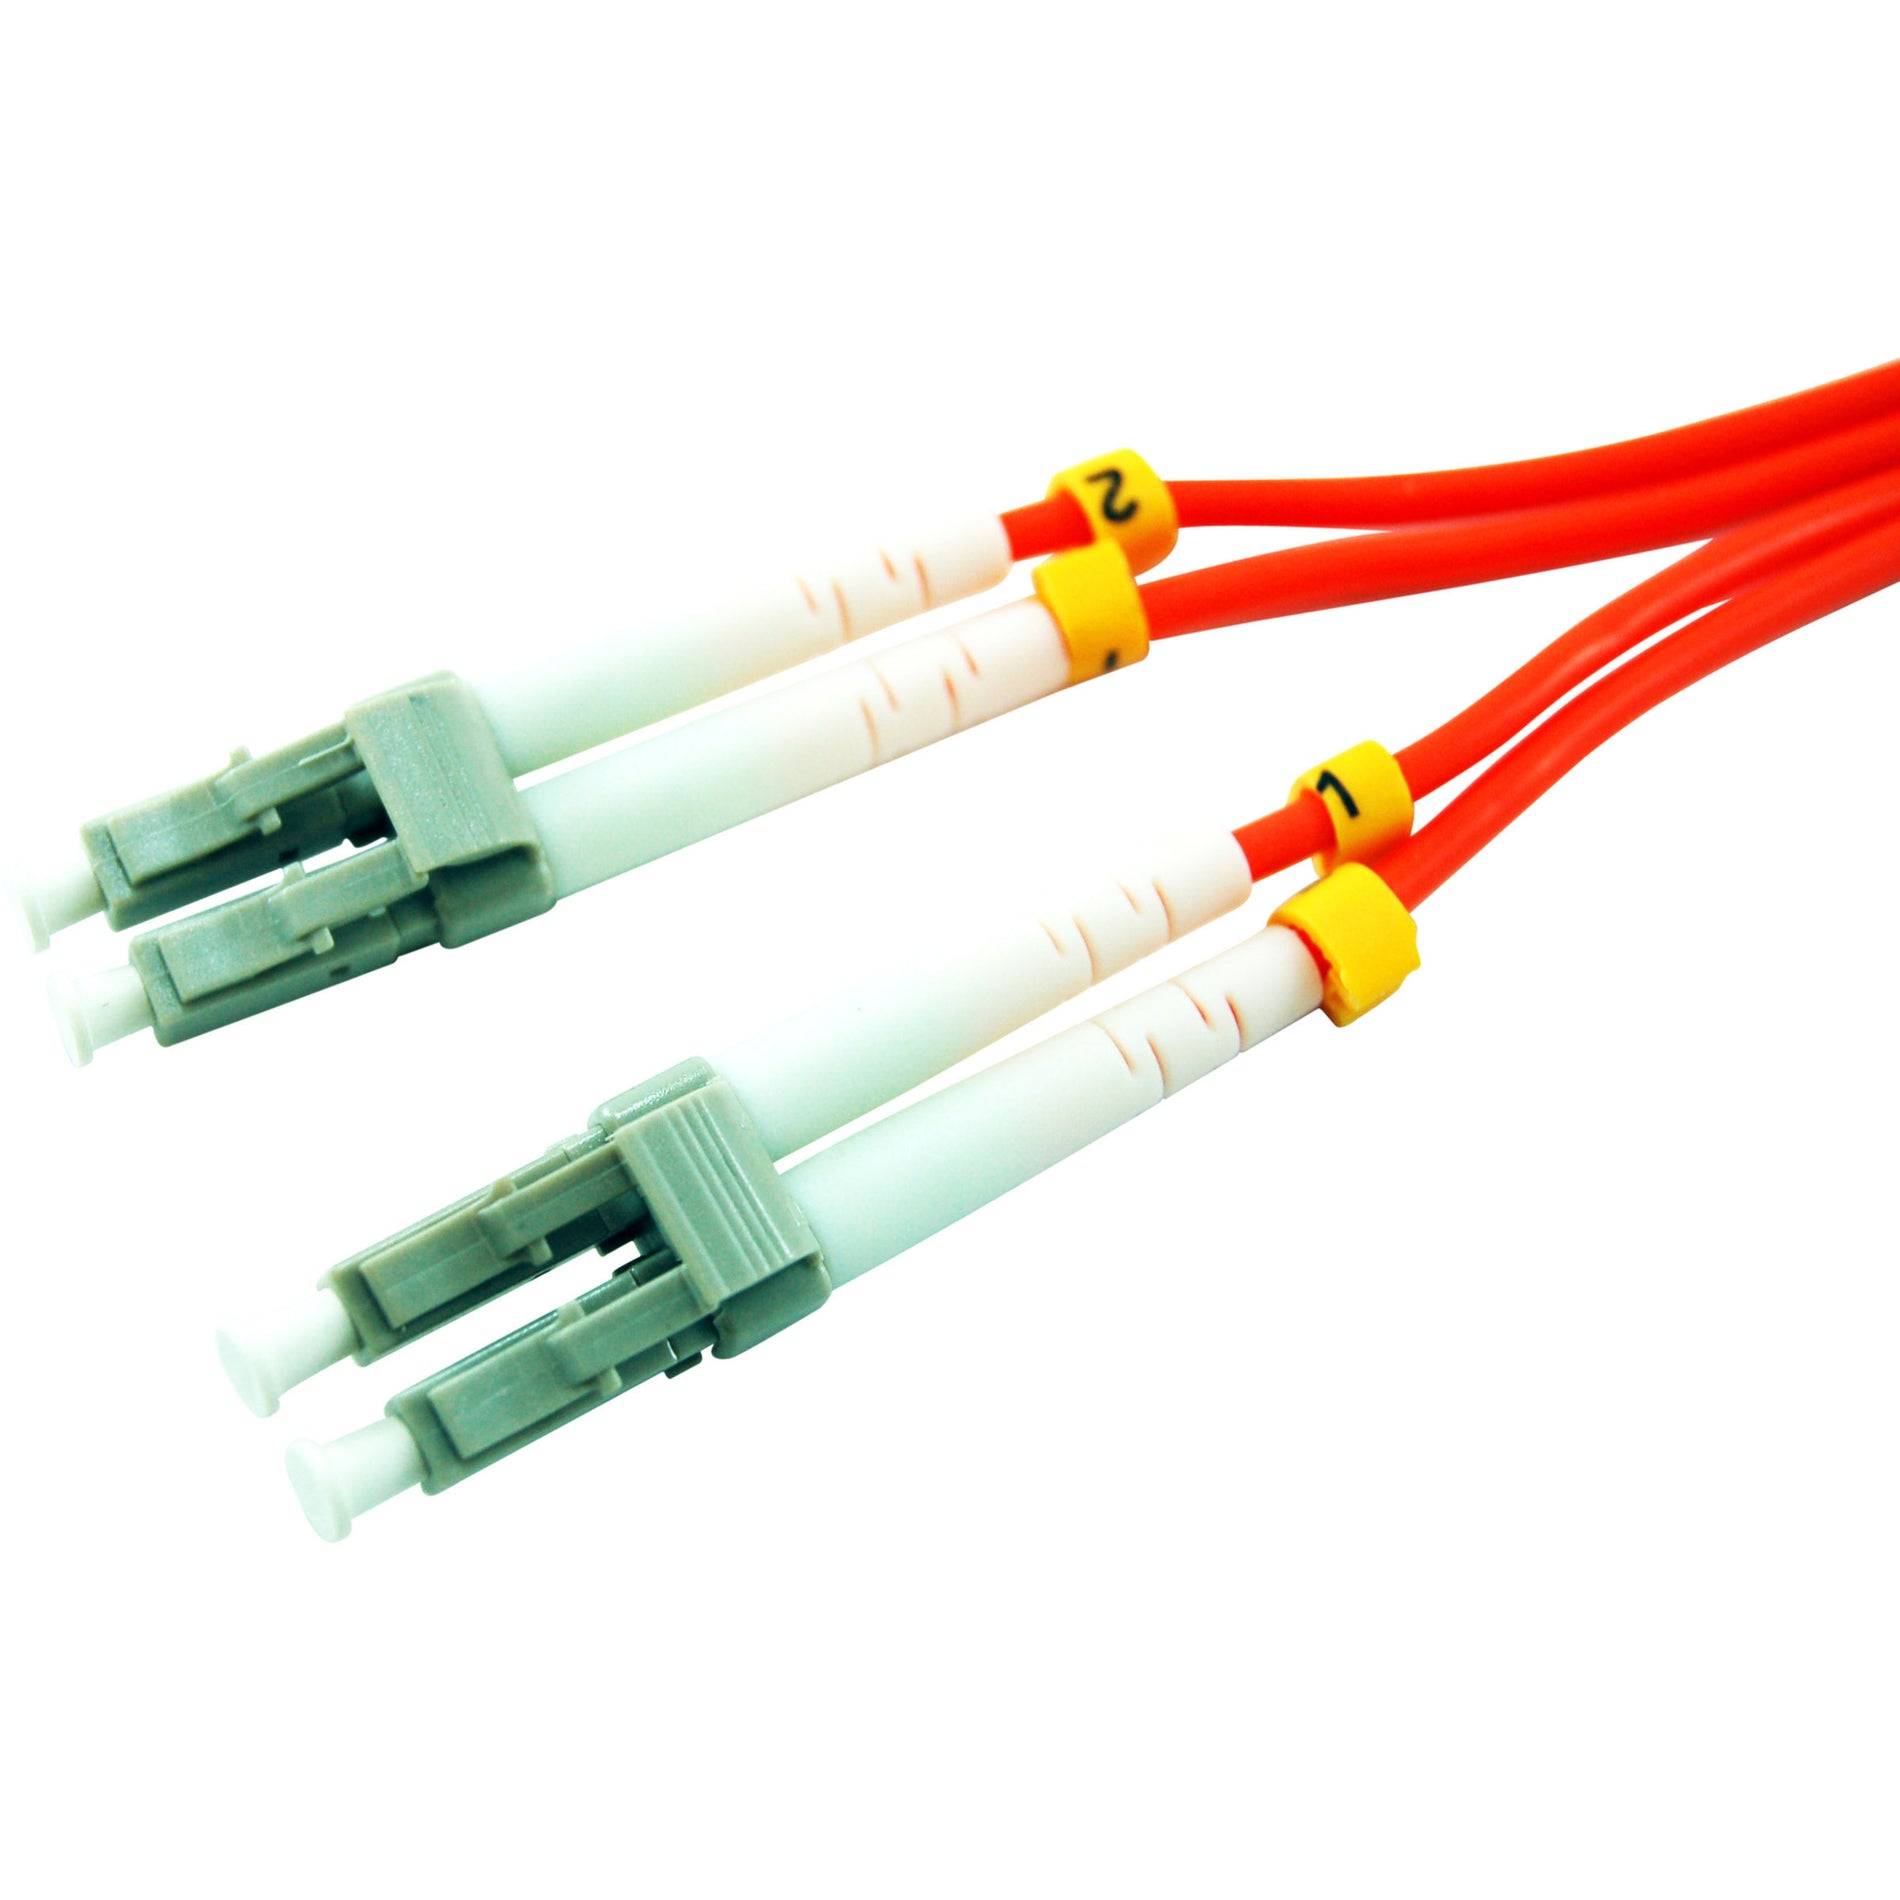 Comprehensive LC-LC-MM-5M 5M LC MM Duplex 62.5/125 Multimode Network Cable, Riser Rated, Molded, 1 Gbit/s Data Transfer Rate